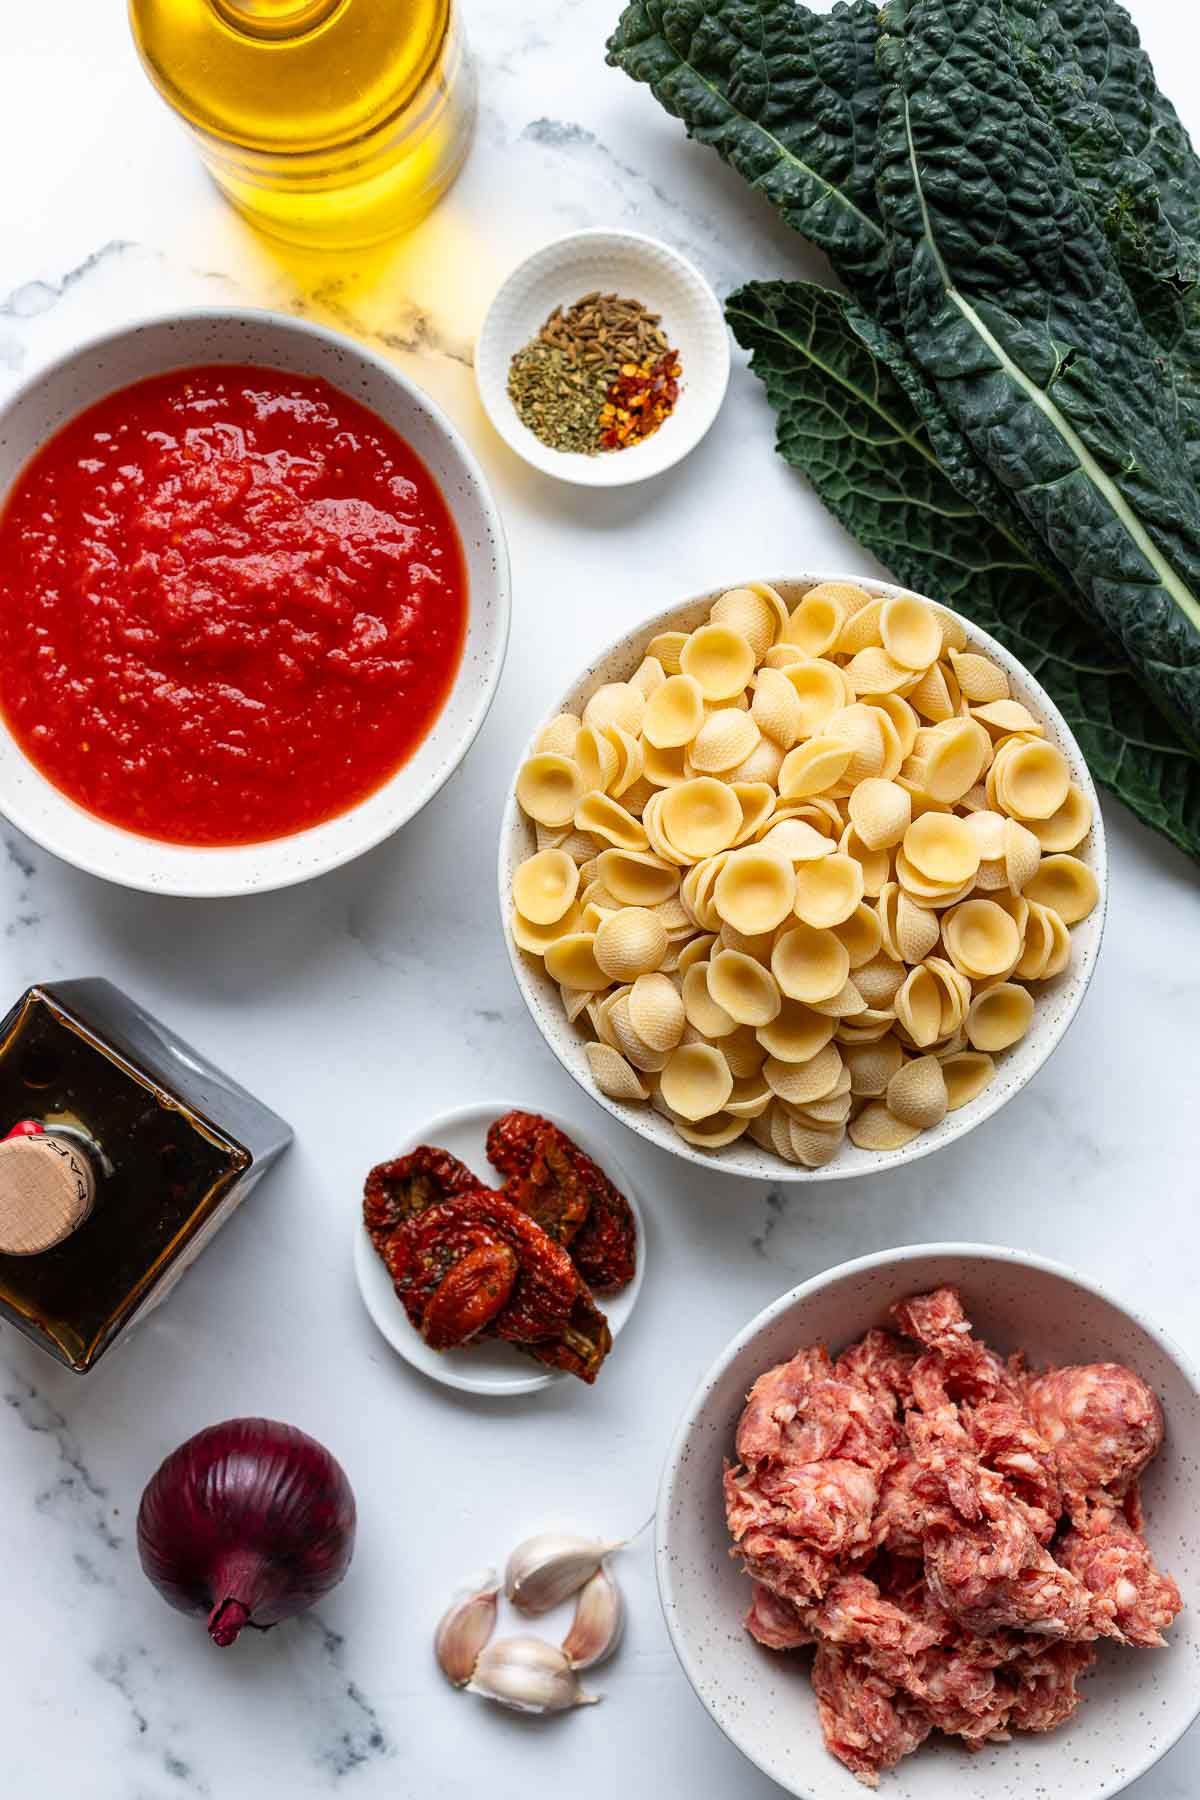 Ingredients for Salsiccia and Kale Pasta